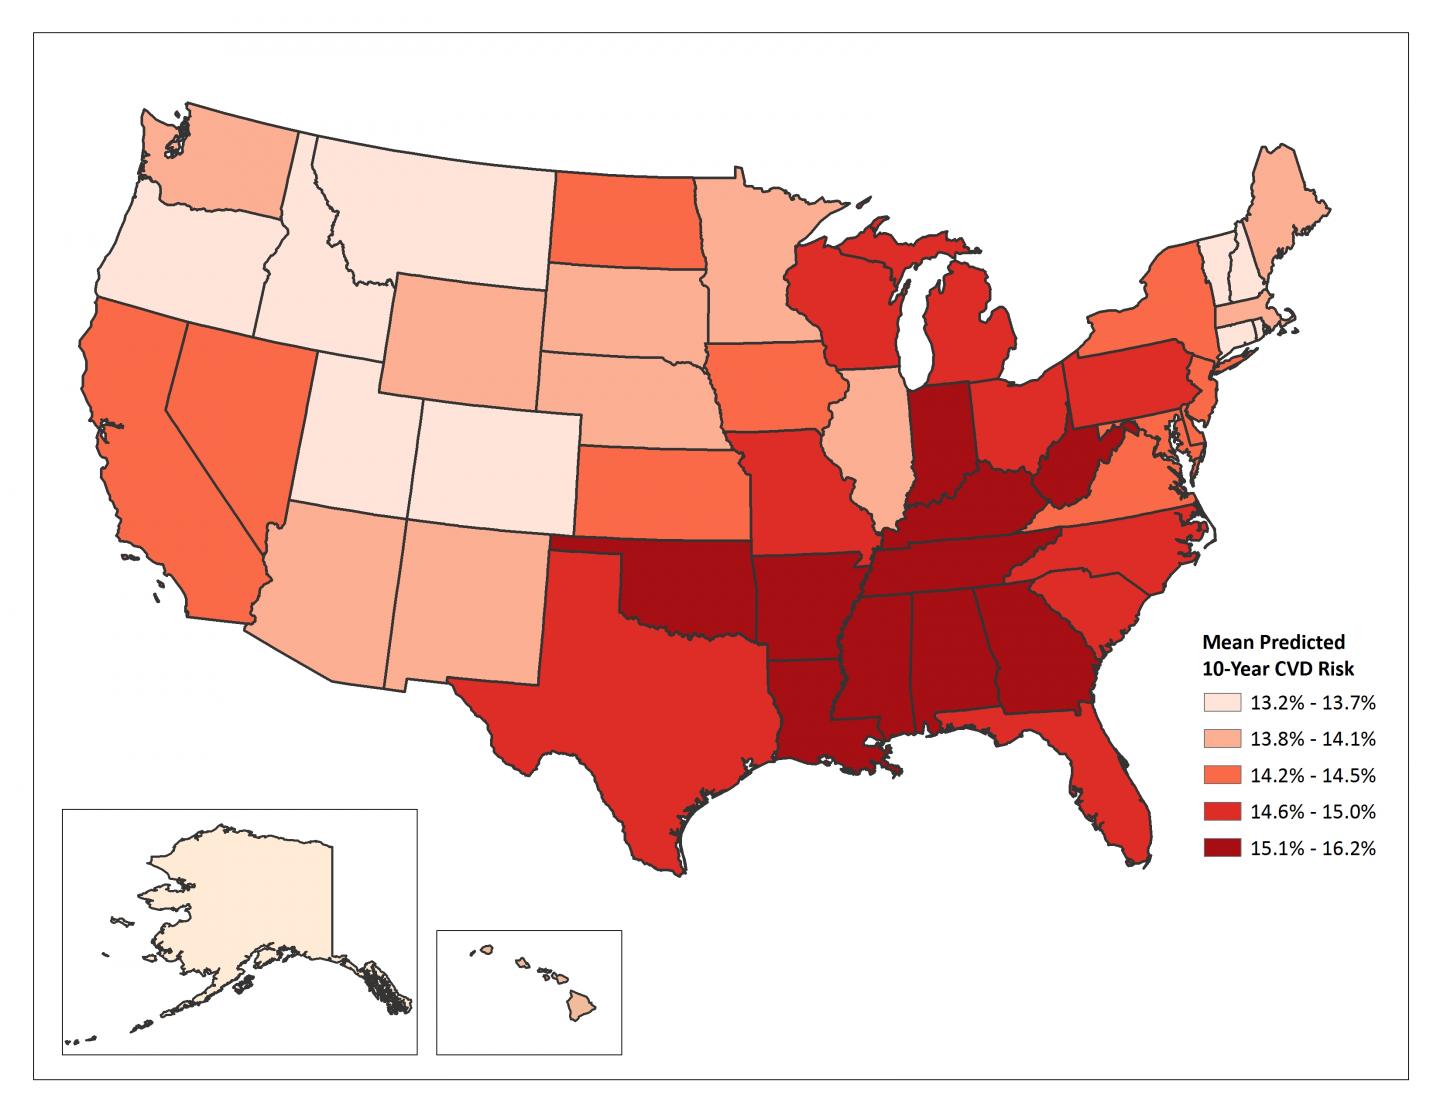 New State Level Data Demonstrate Geographical Variation in 10-Year Cardiovascular Risk (1 of 2)